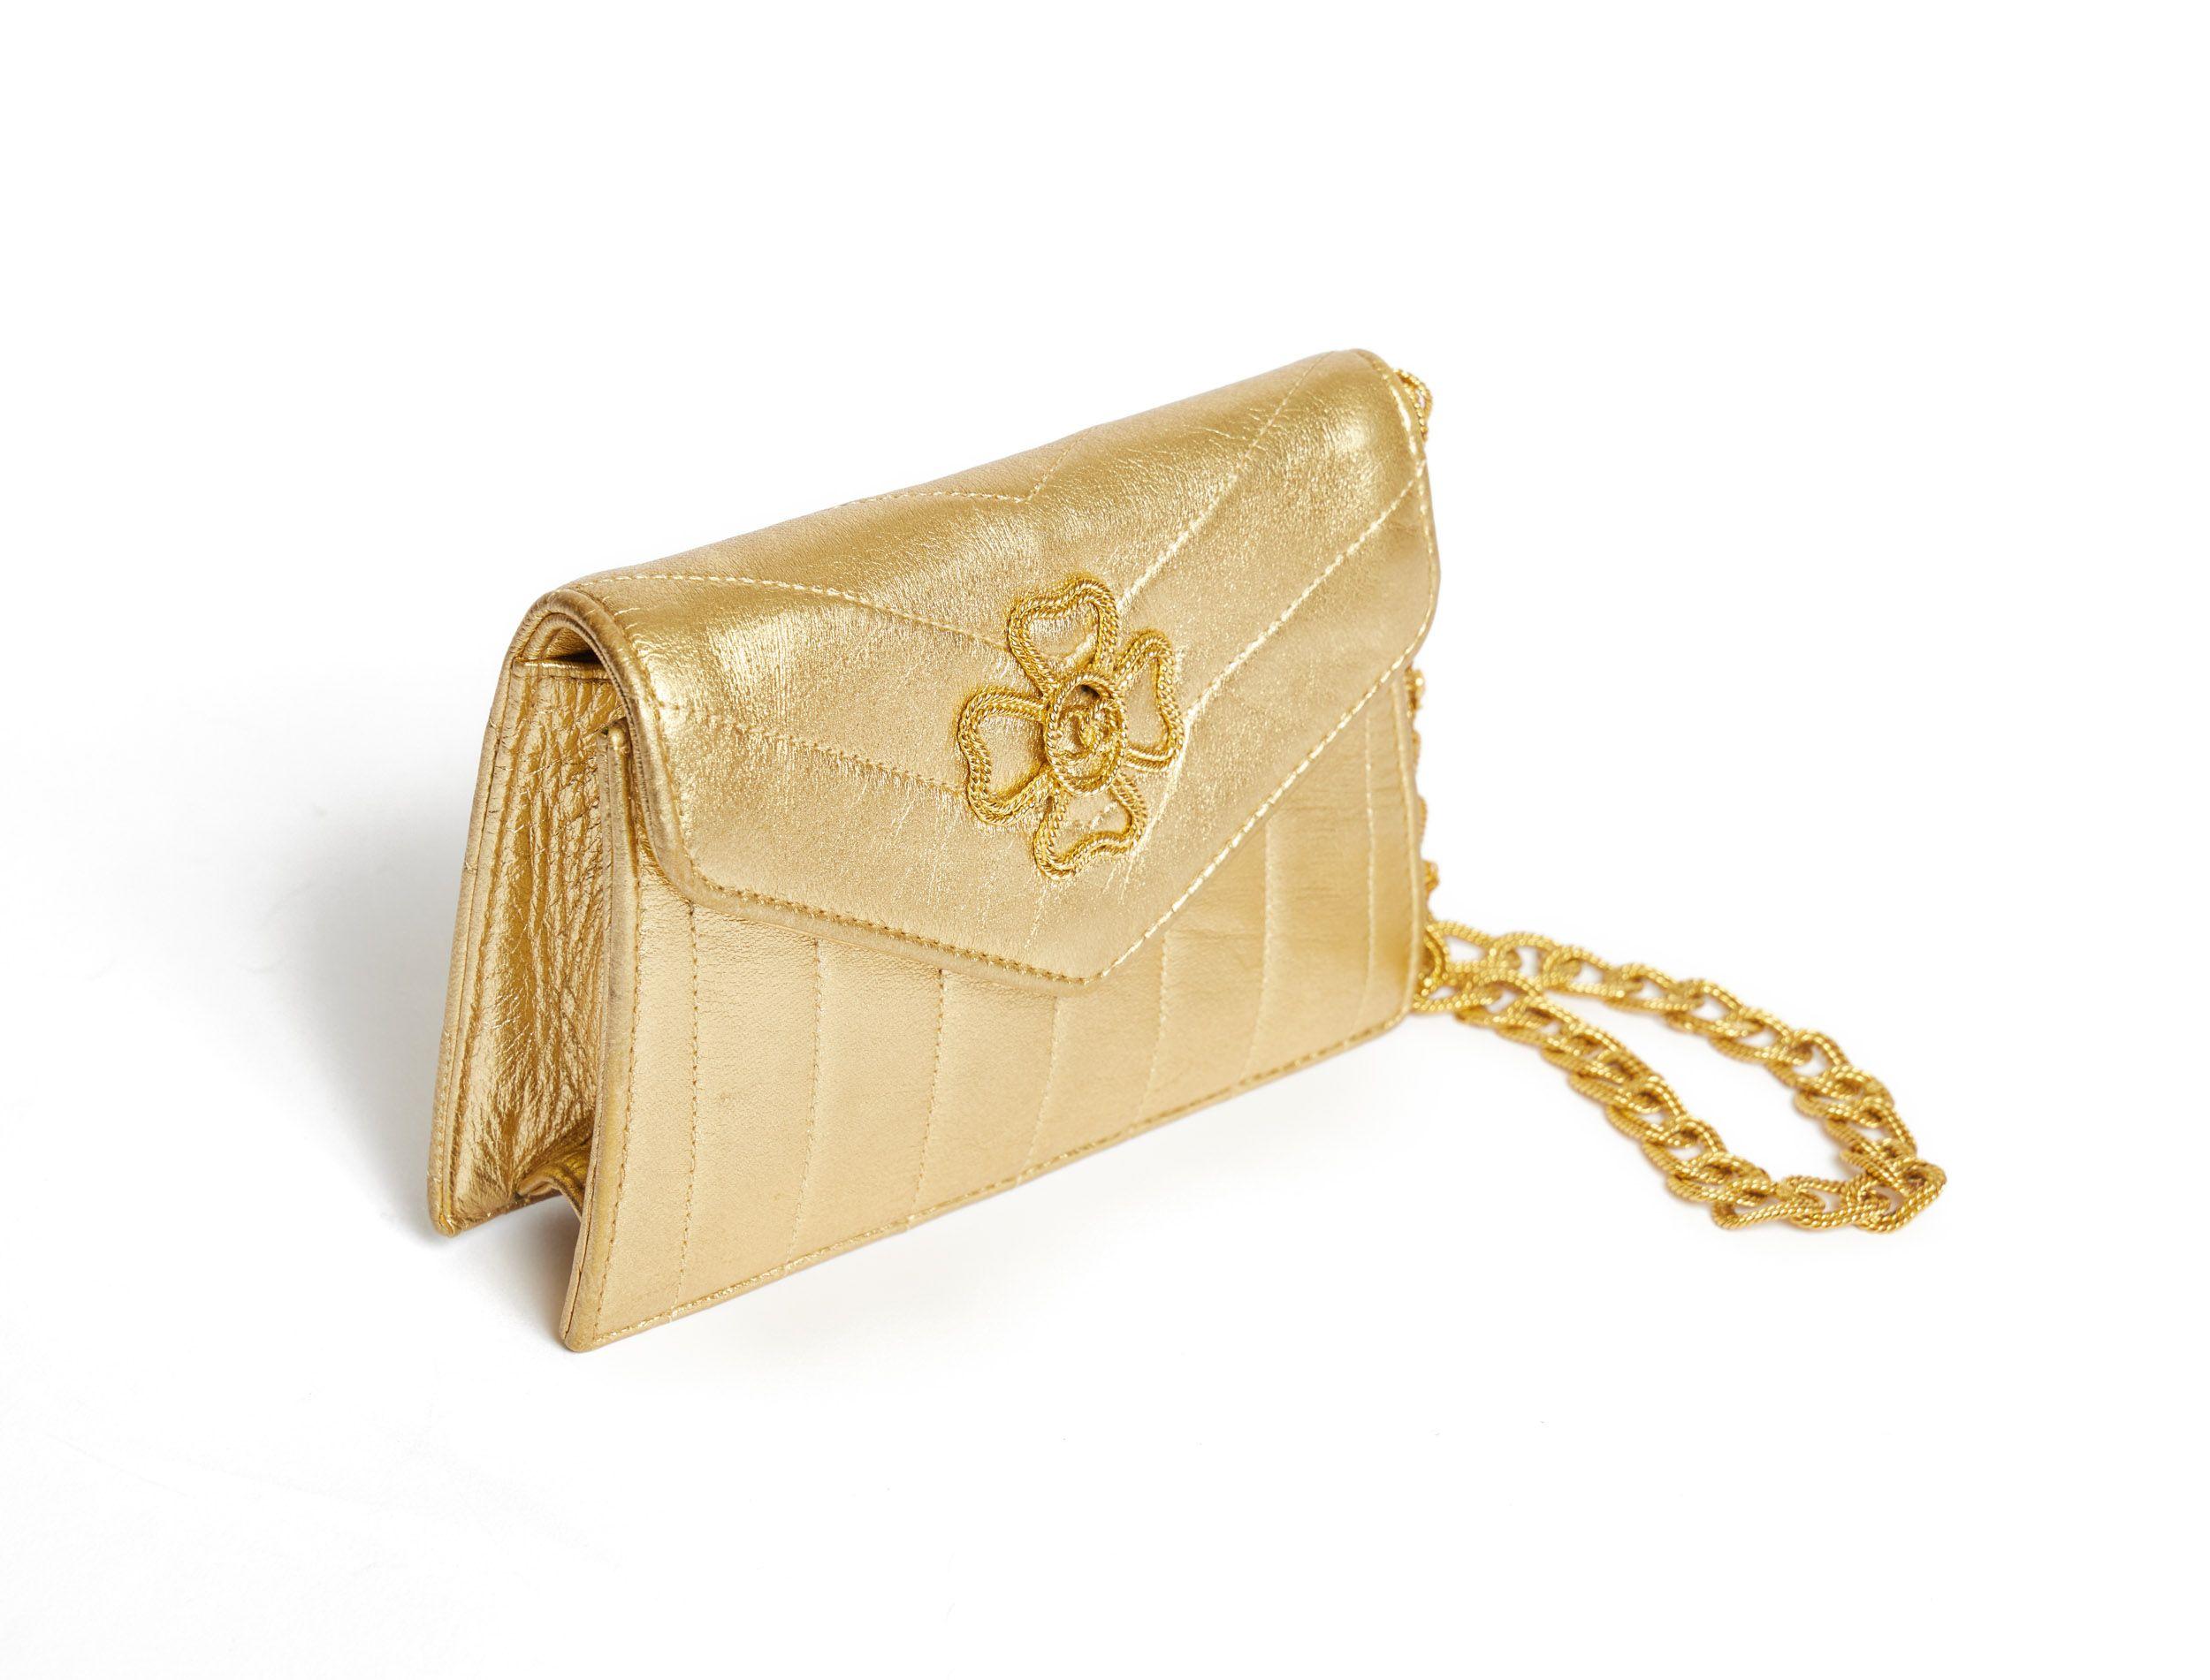 Chanel Vintage gold mini wrist bag with a golden chain made like a super elegant bracelet. The chain is decorated with little CC logos and looks like a small rope (18' long). The bag is completely golden and the perfect evening bag. On front of the